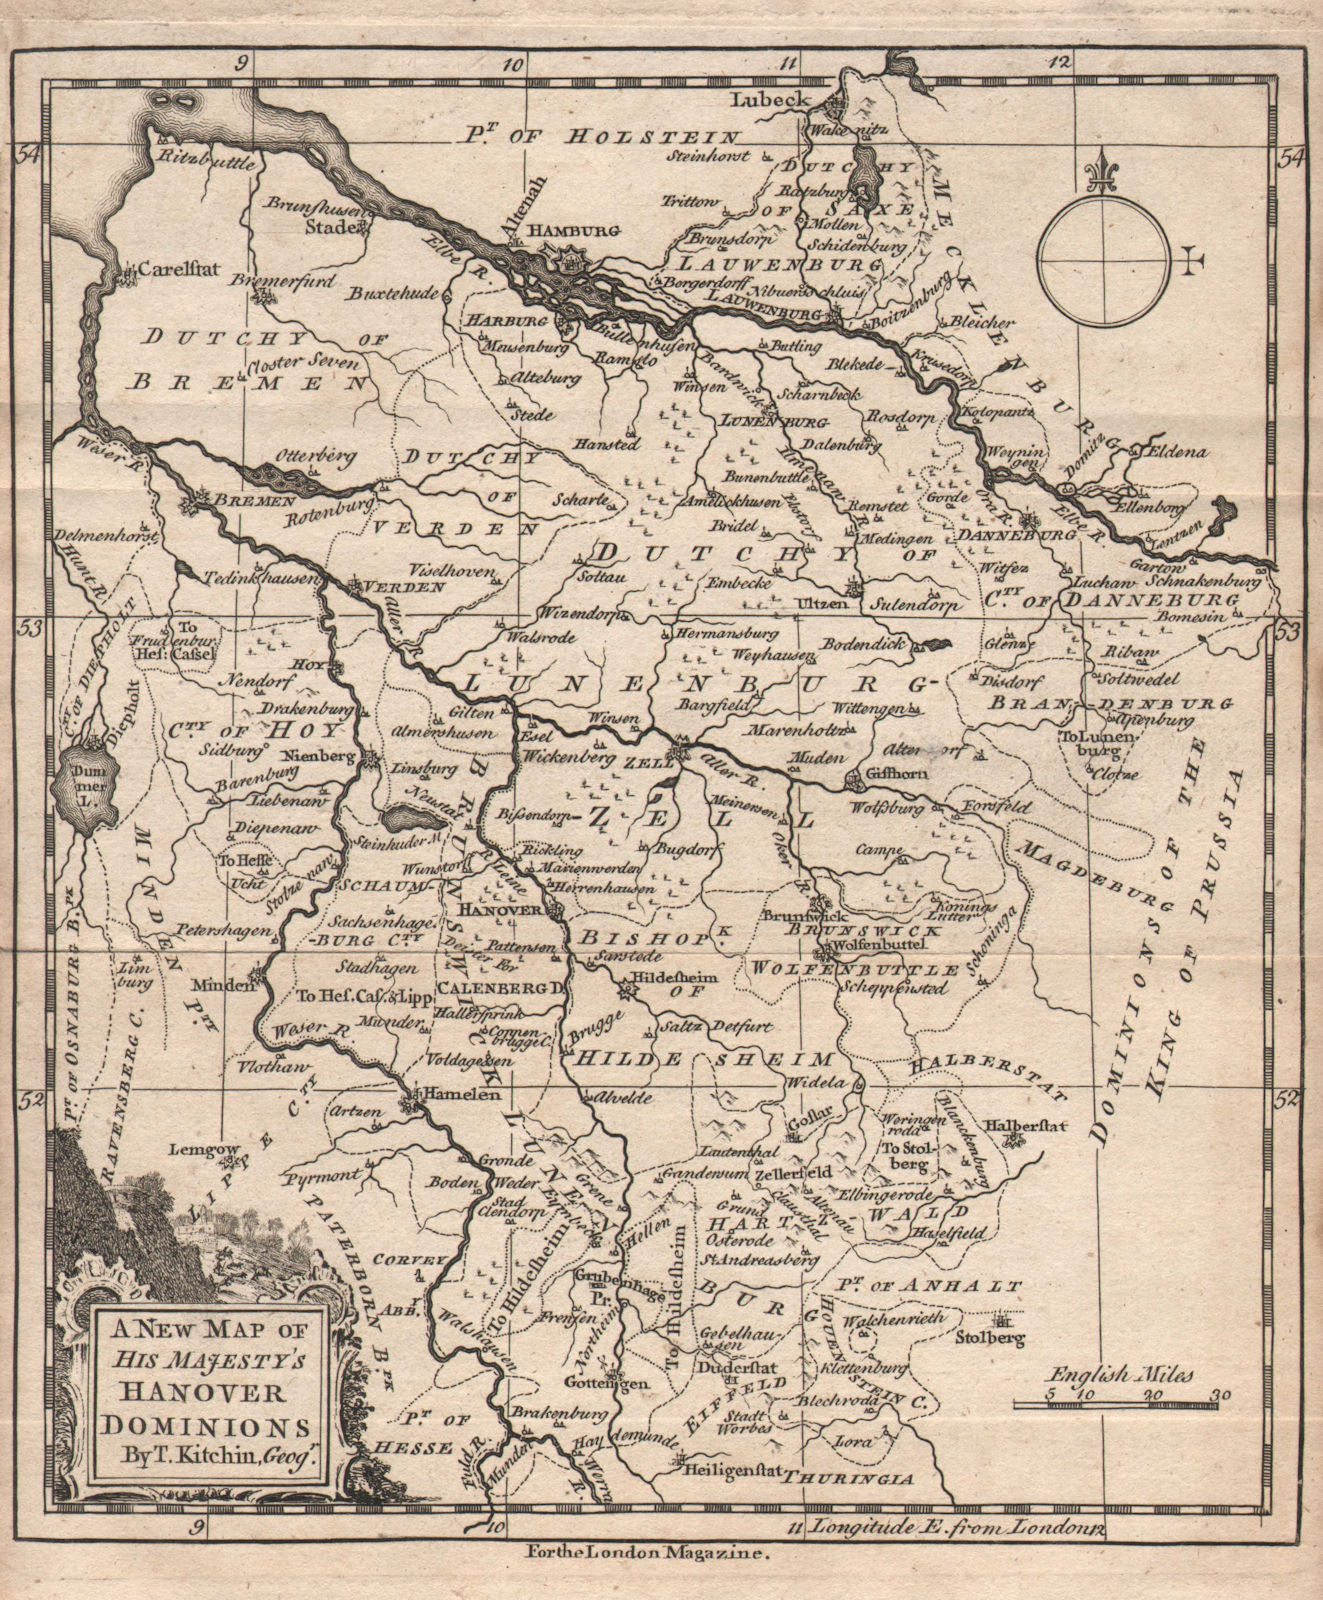 "A new Map of His Majesty's Hanover Dominions". Lower Saxony. KITCHIN c1755